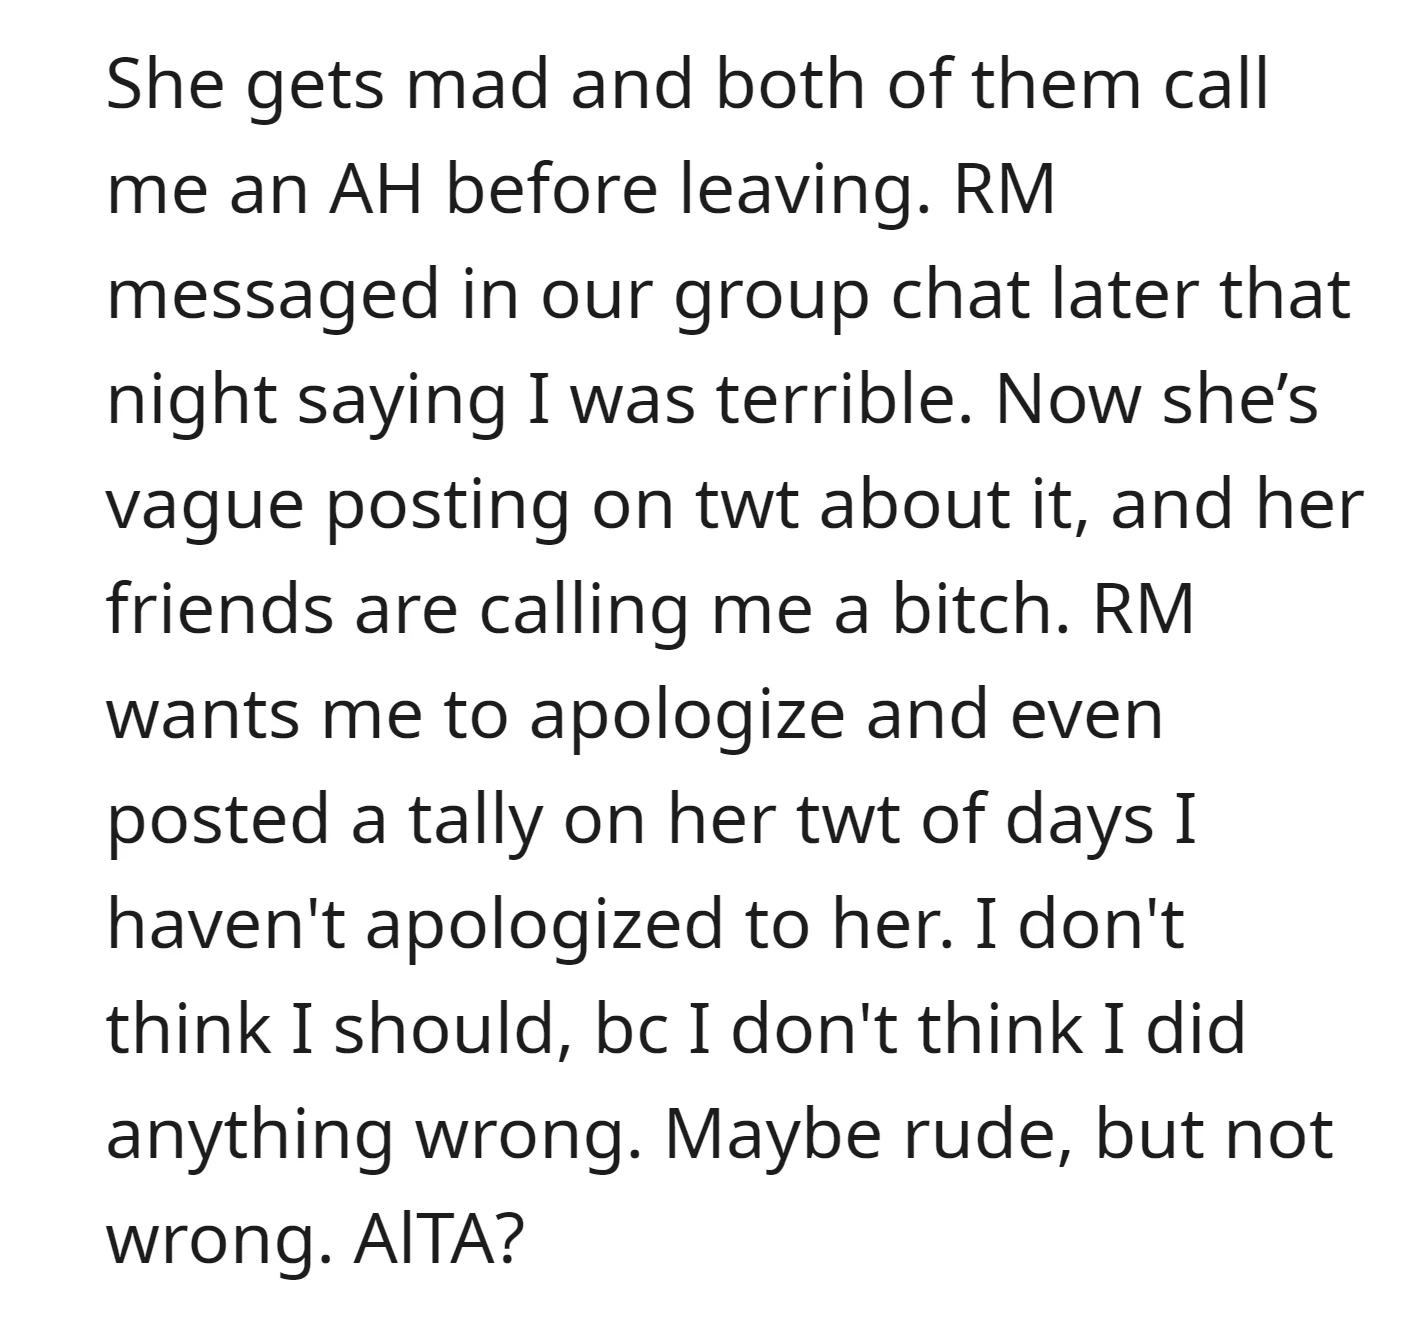 The roommate and her partner get upset, and she even takes the issue to social media